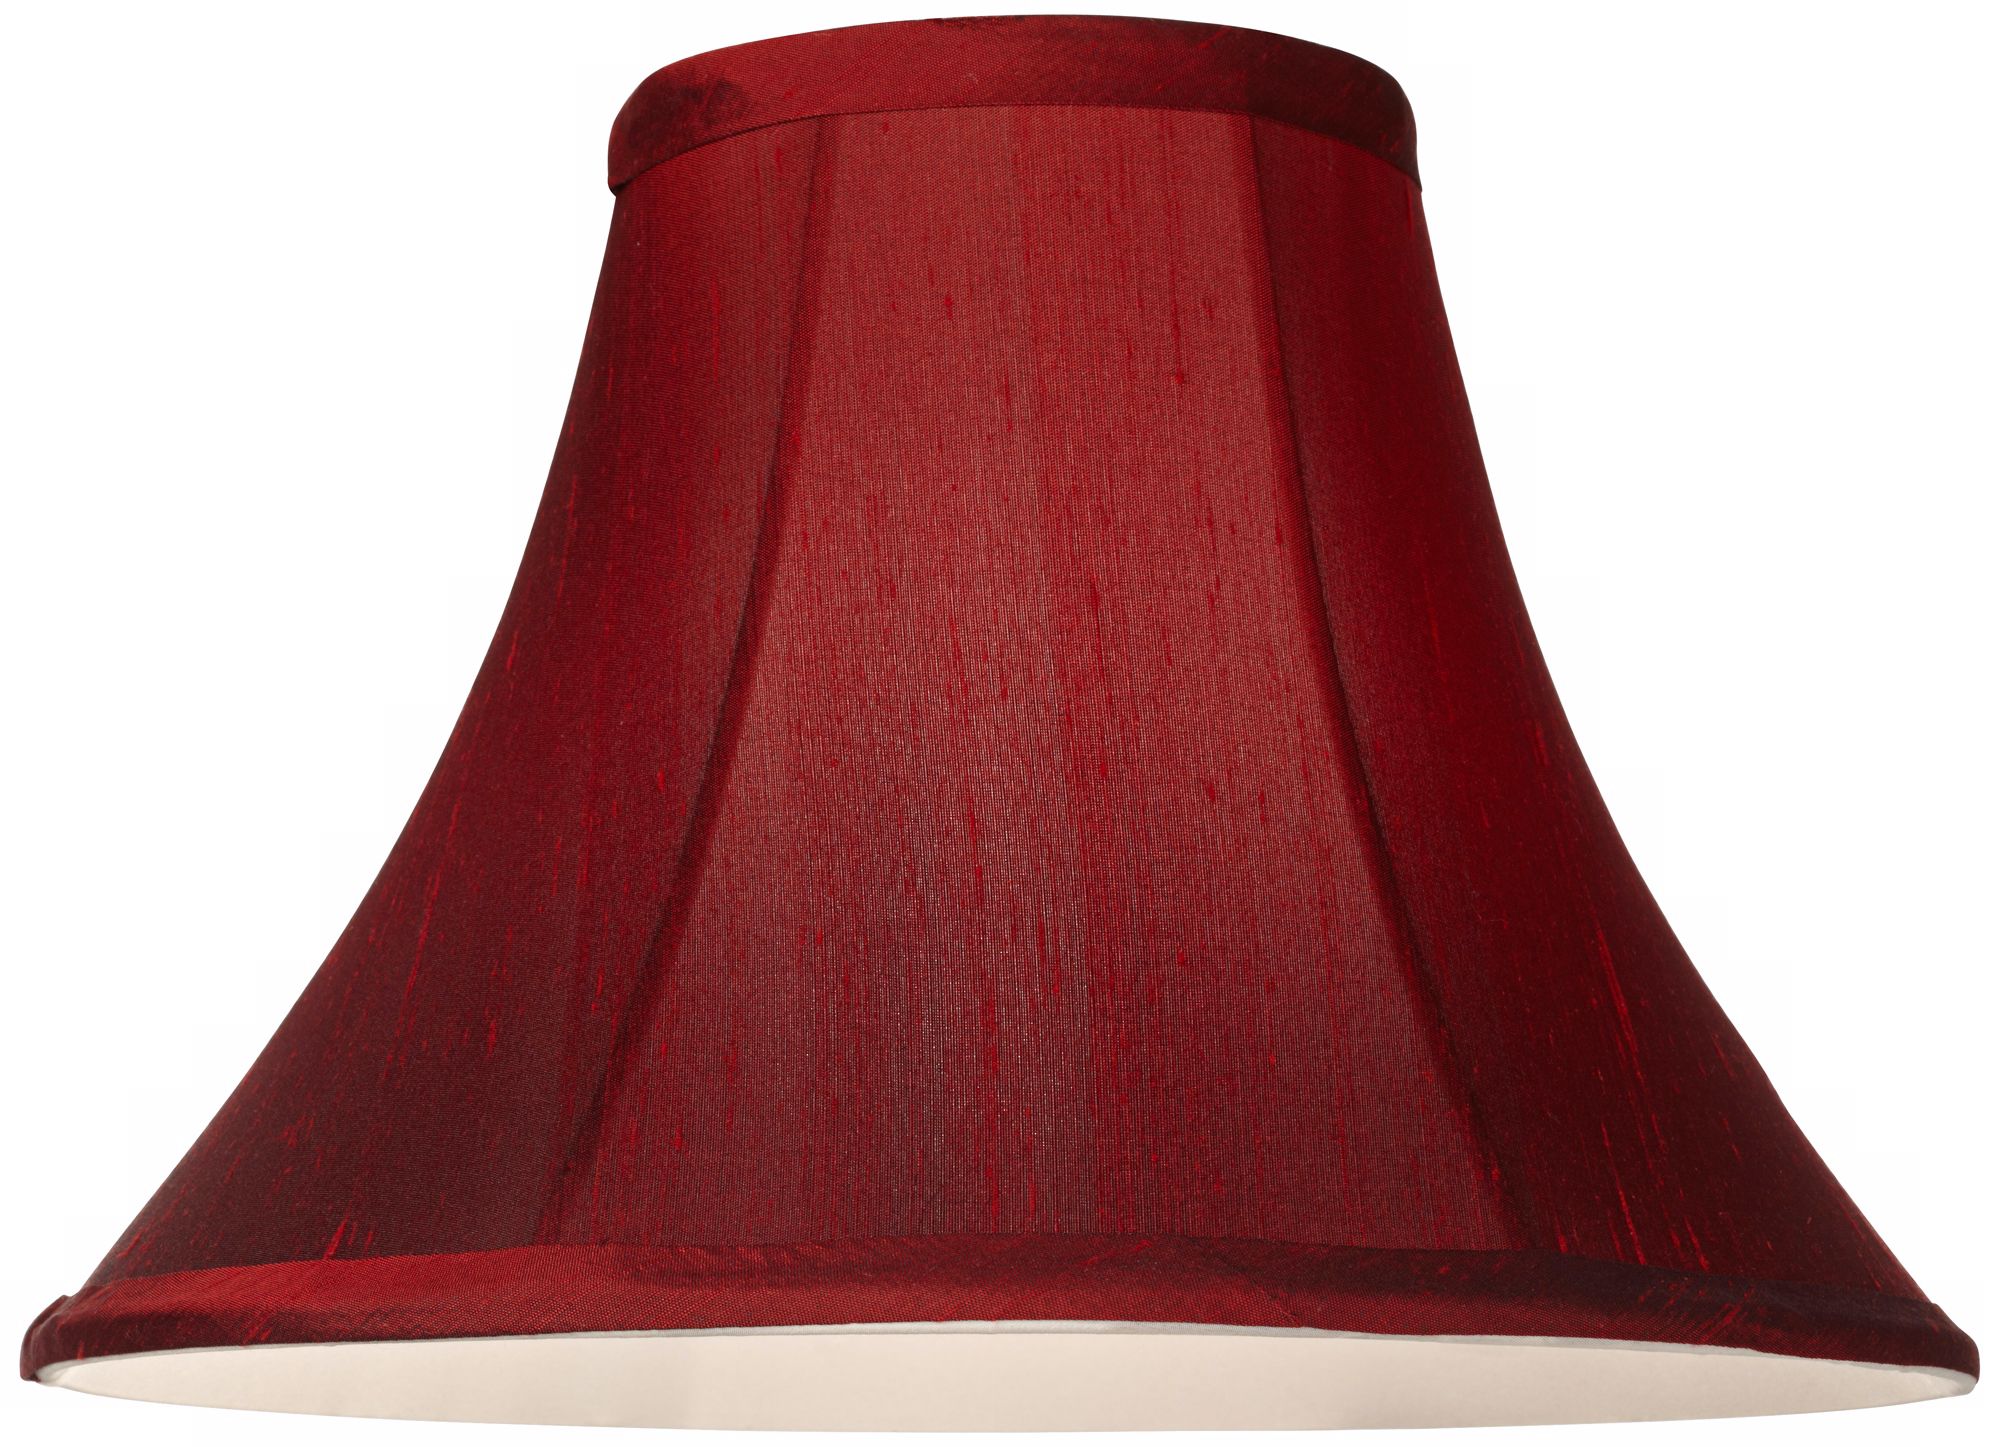 Springcrest Collection Set of 2 Bell Lamp Shades Deep Red Small 5 Top x 12 Bottom x 9 Slant x 8.5 High Spider Replacement Harp and Finial Fitting